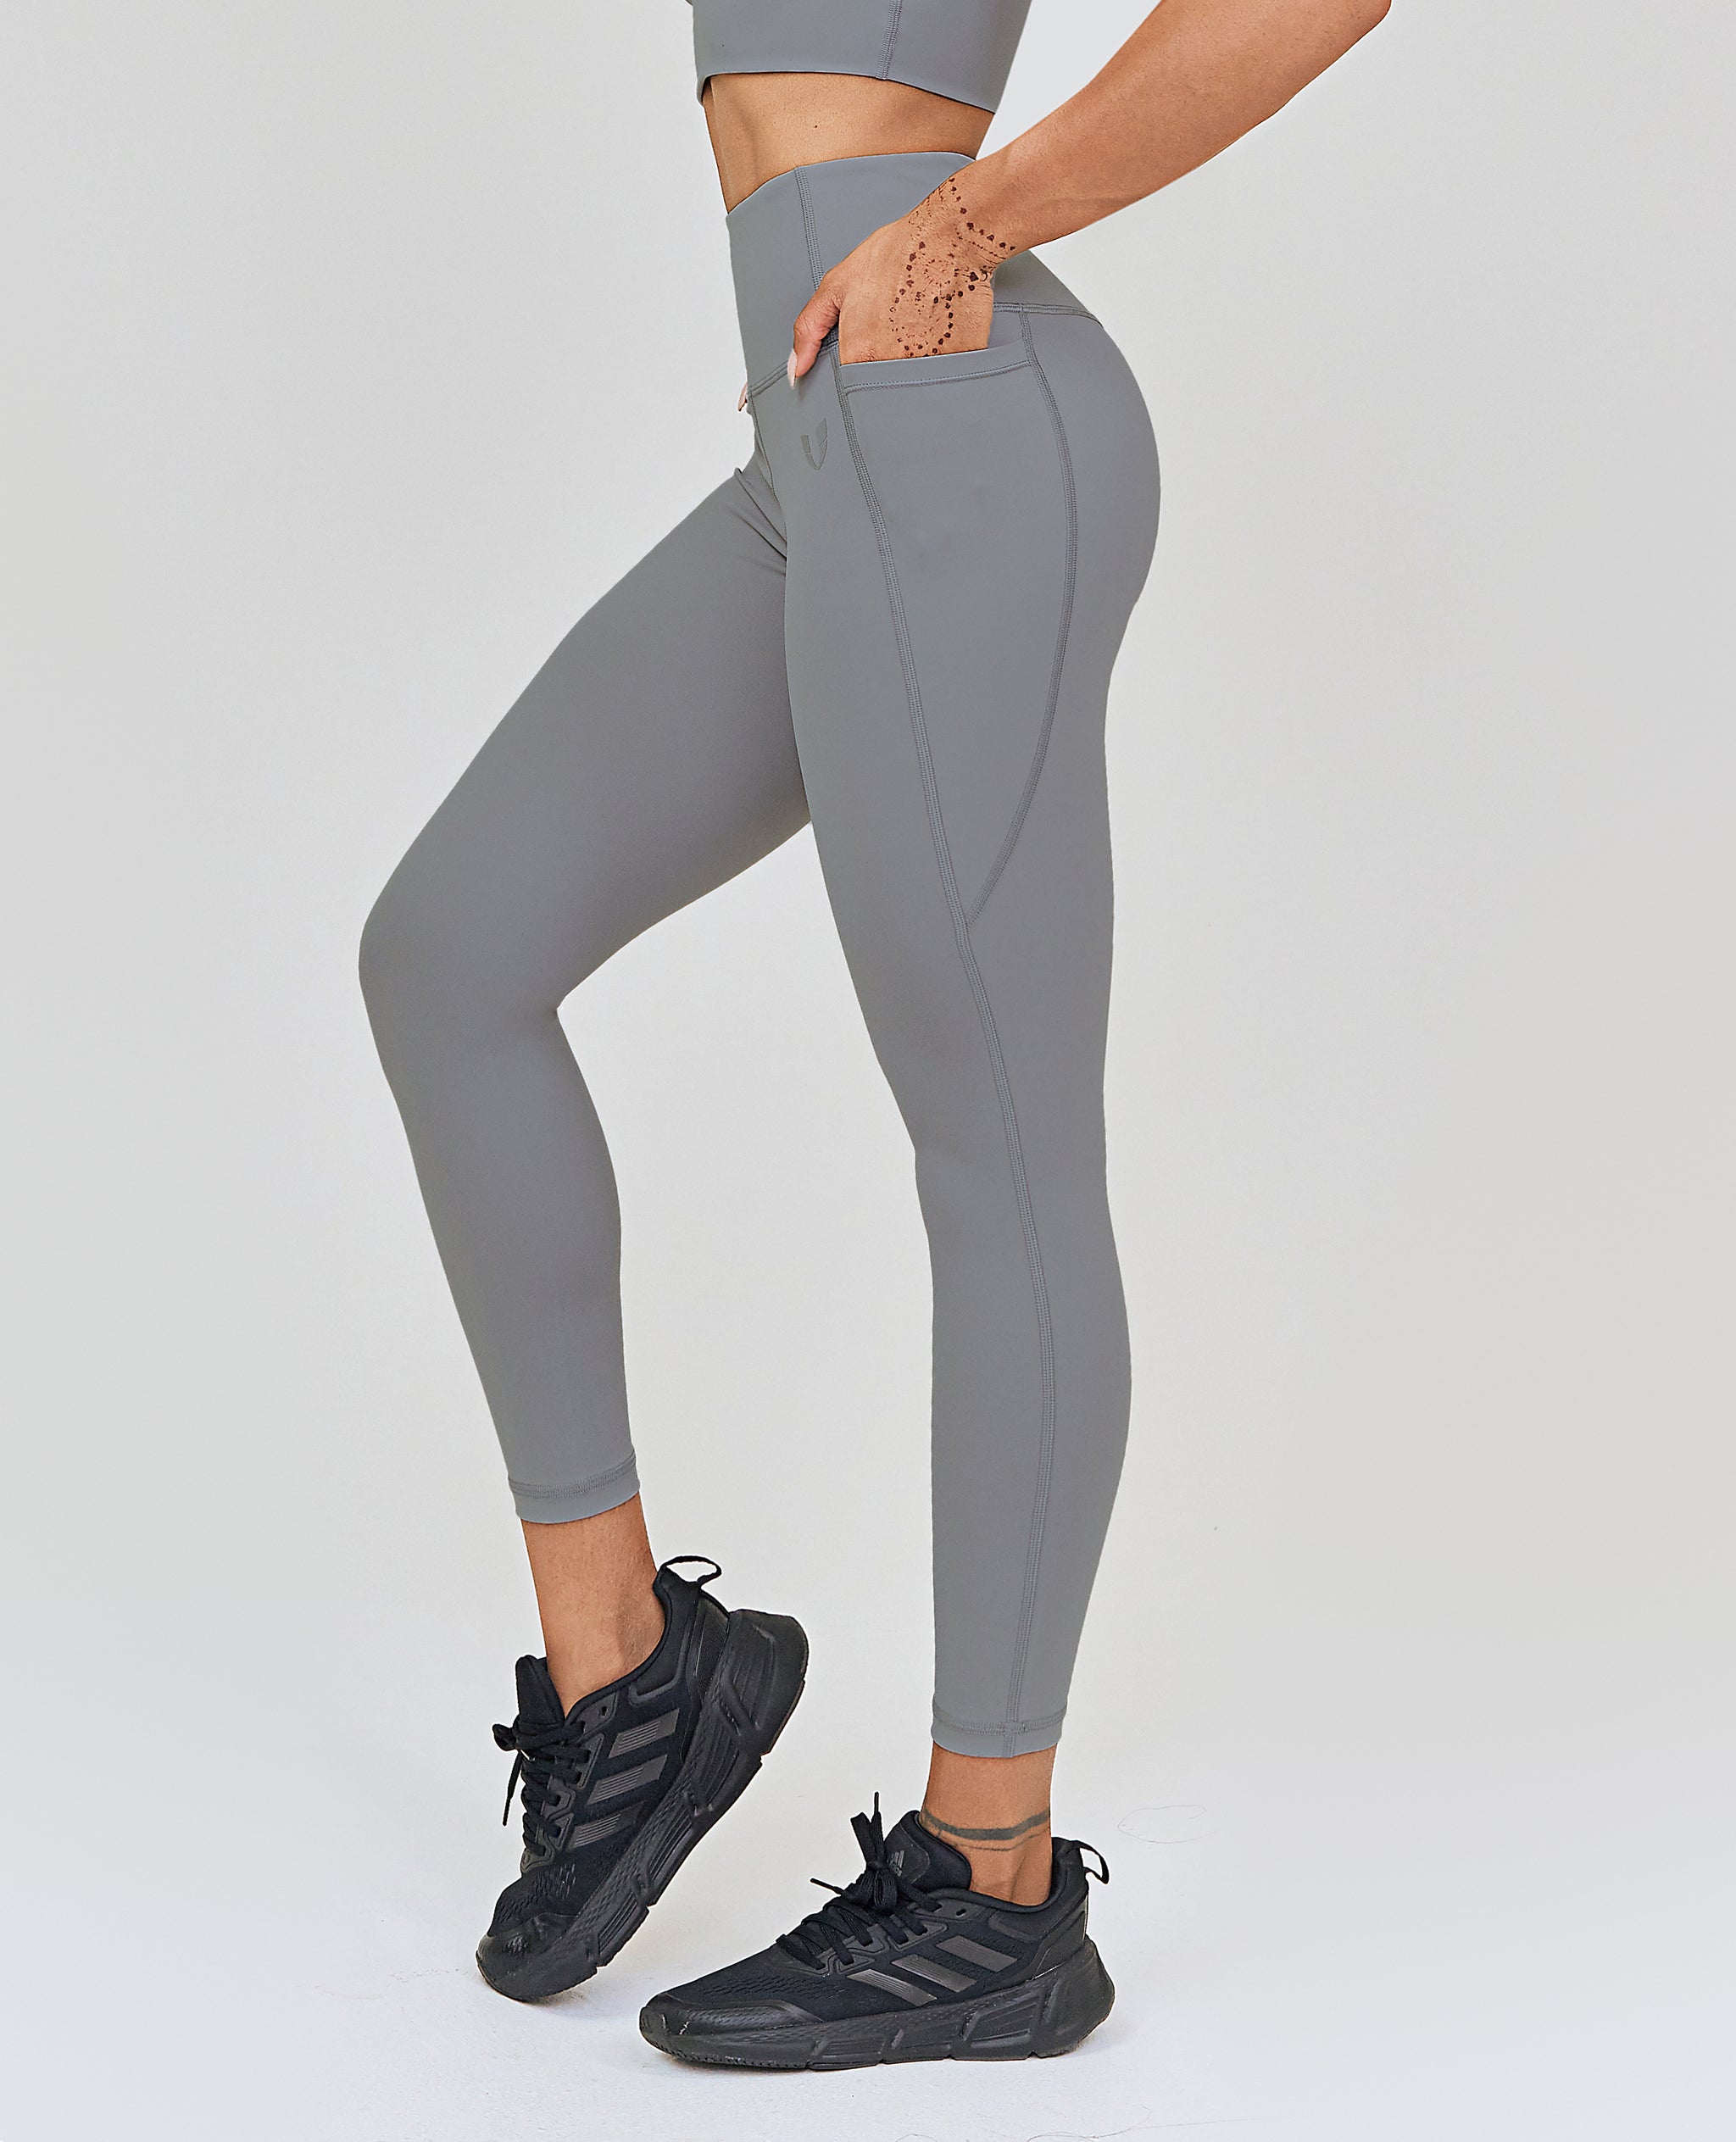 Debut High Waisted Leggings - Gray – Square One Athletics